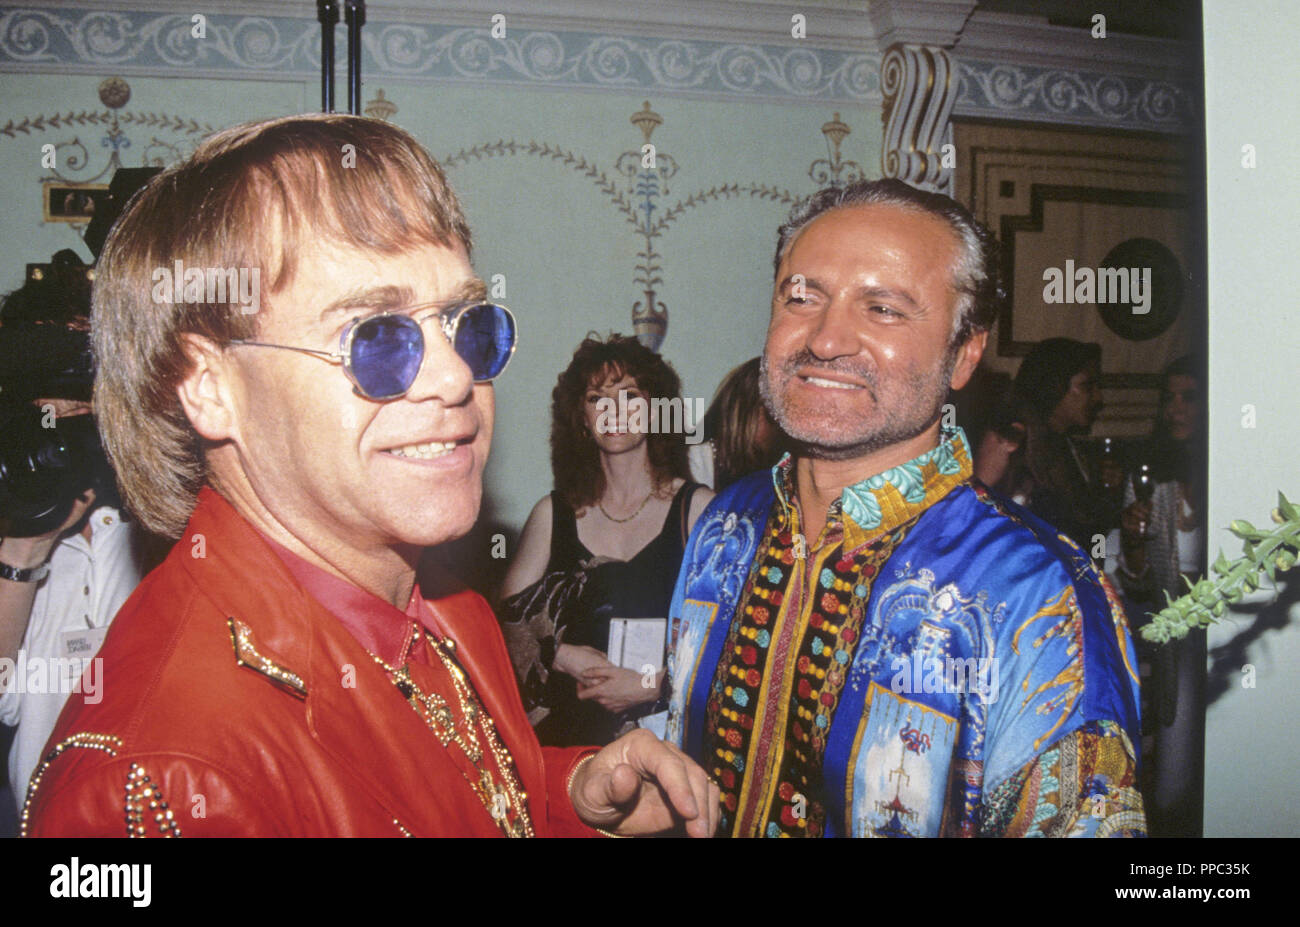 Gianni Versace with Elton John at Versace's party Â© GRANATAIMAGES Stock  Photo - Alamy